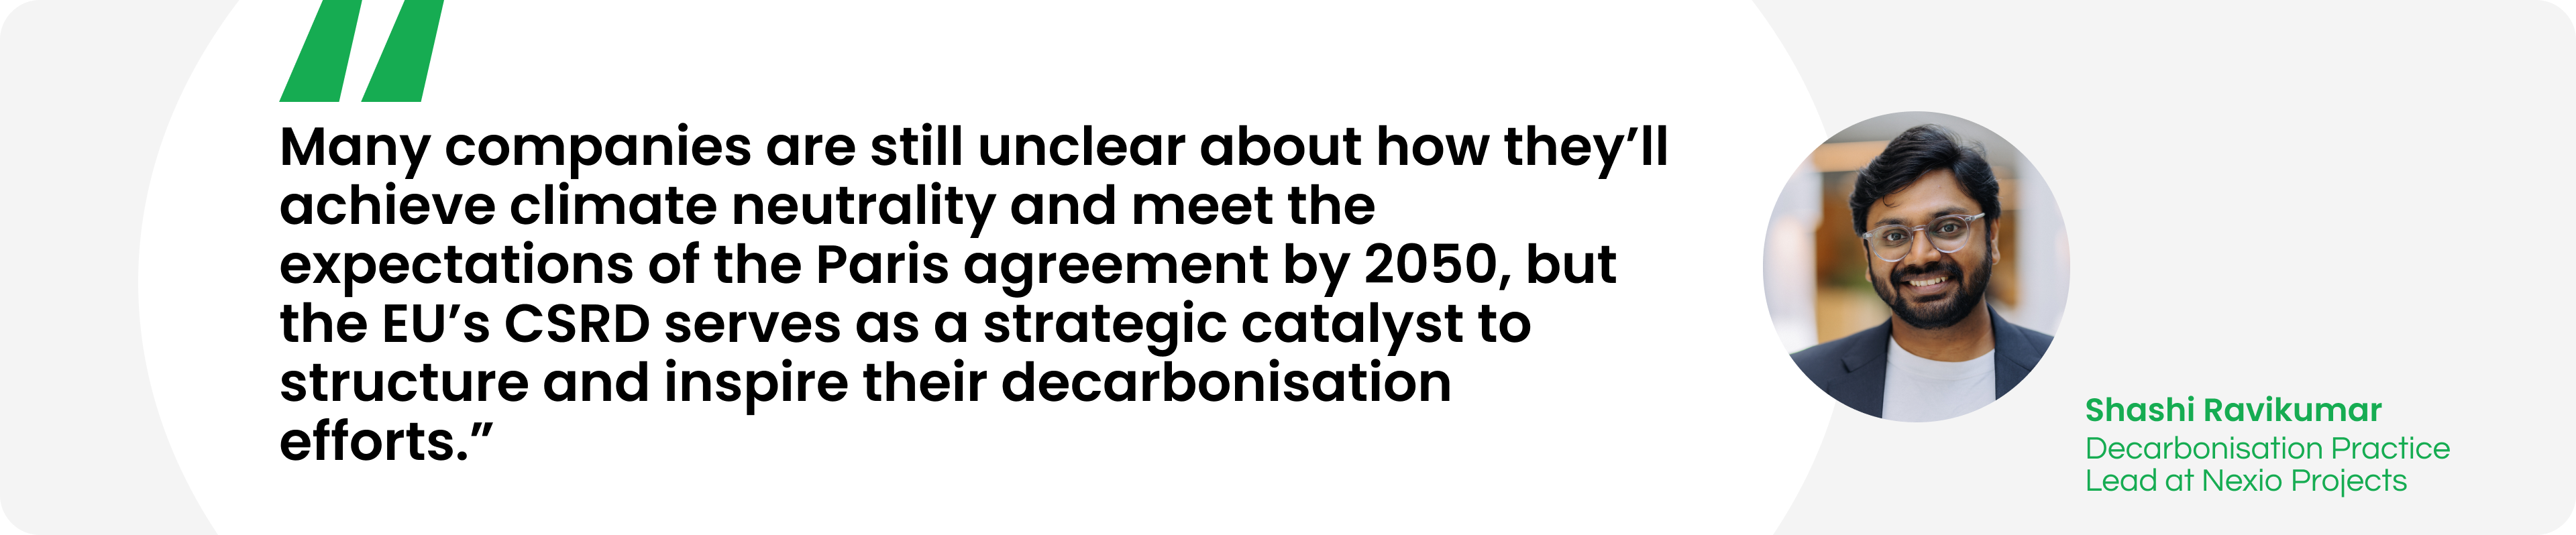 Quote from the Nexio Projects decarbonisation lead on climate neutrality